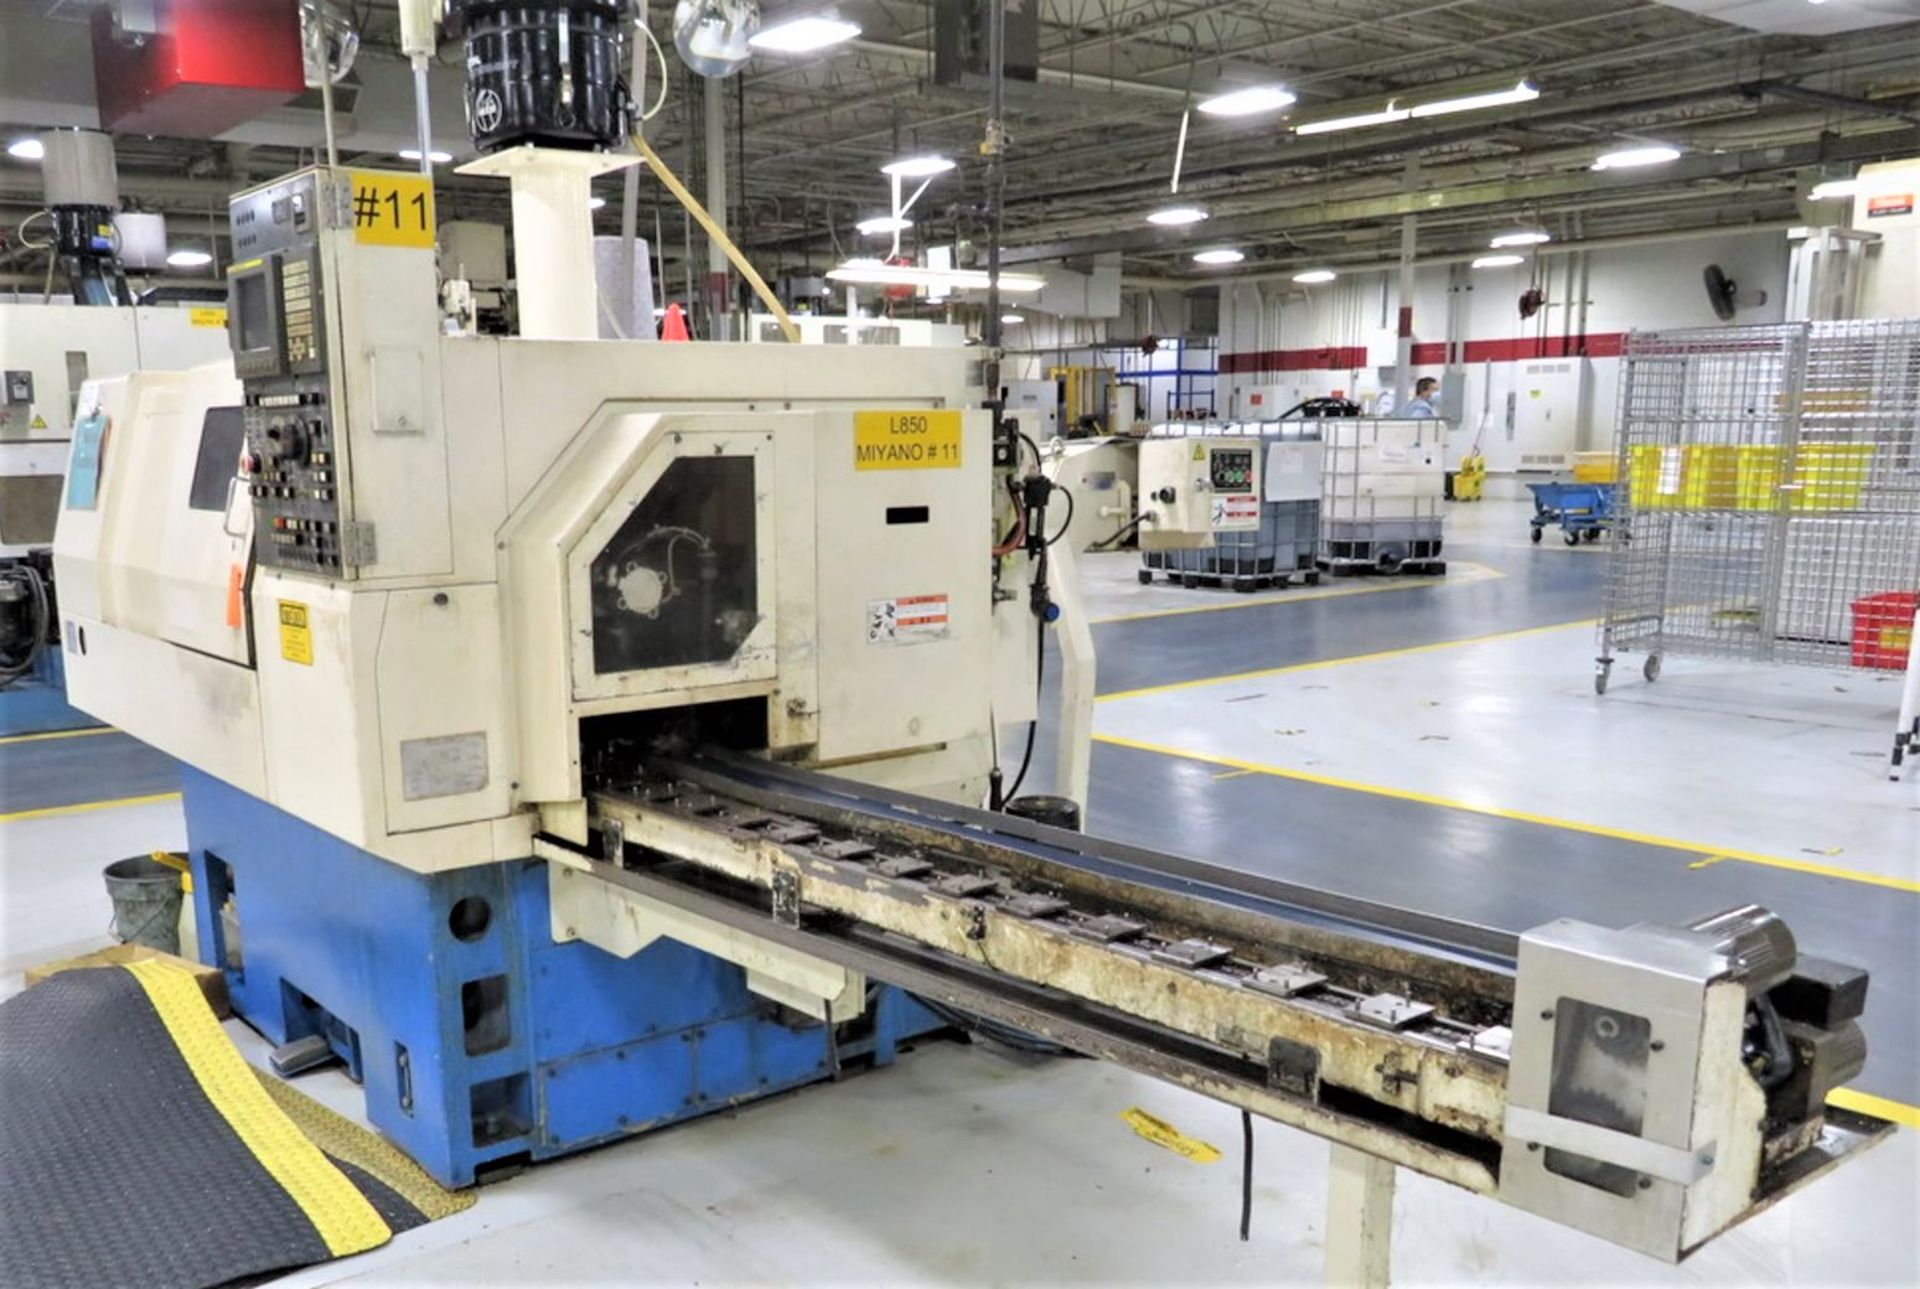 MIYANO LZ-02R CNC 3-AXIS CHUCKER W/ROBOTIC LOADING & LIVE TOOLING, S/N 3XR20010, NEW 2006 - Image 2 of 9